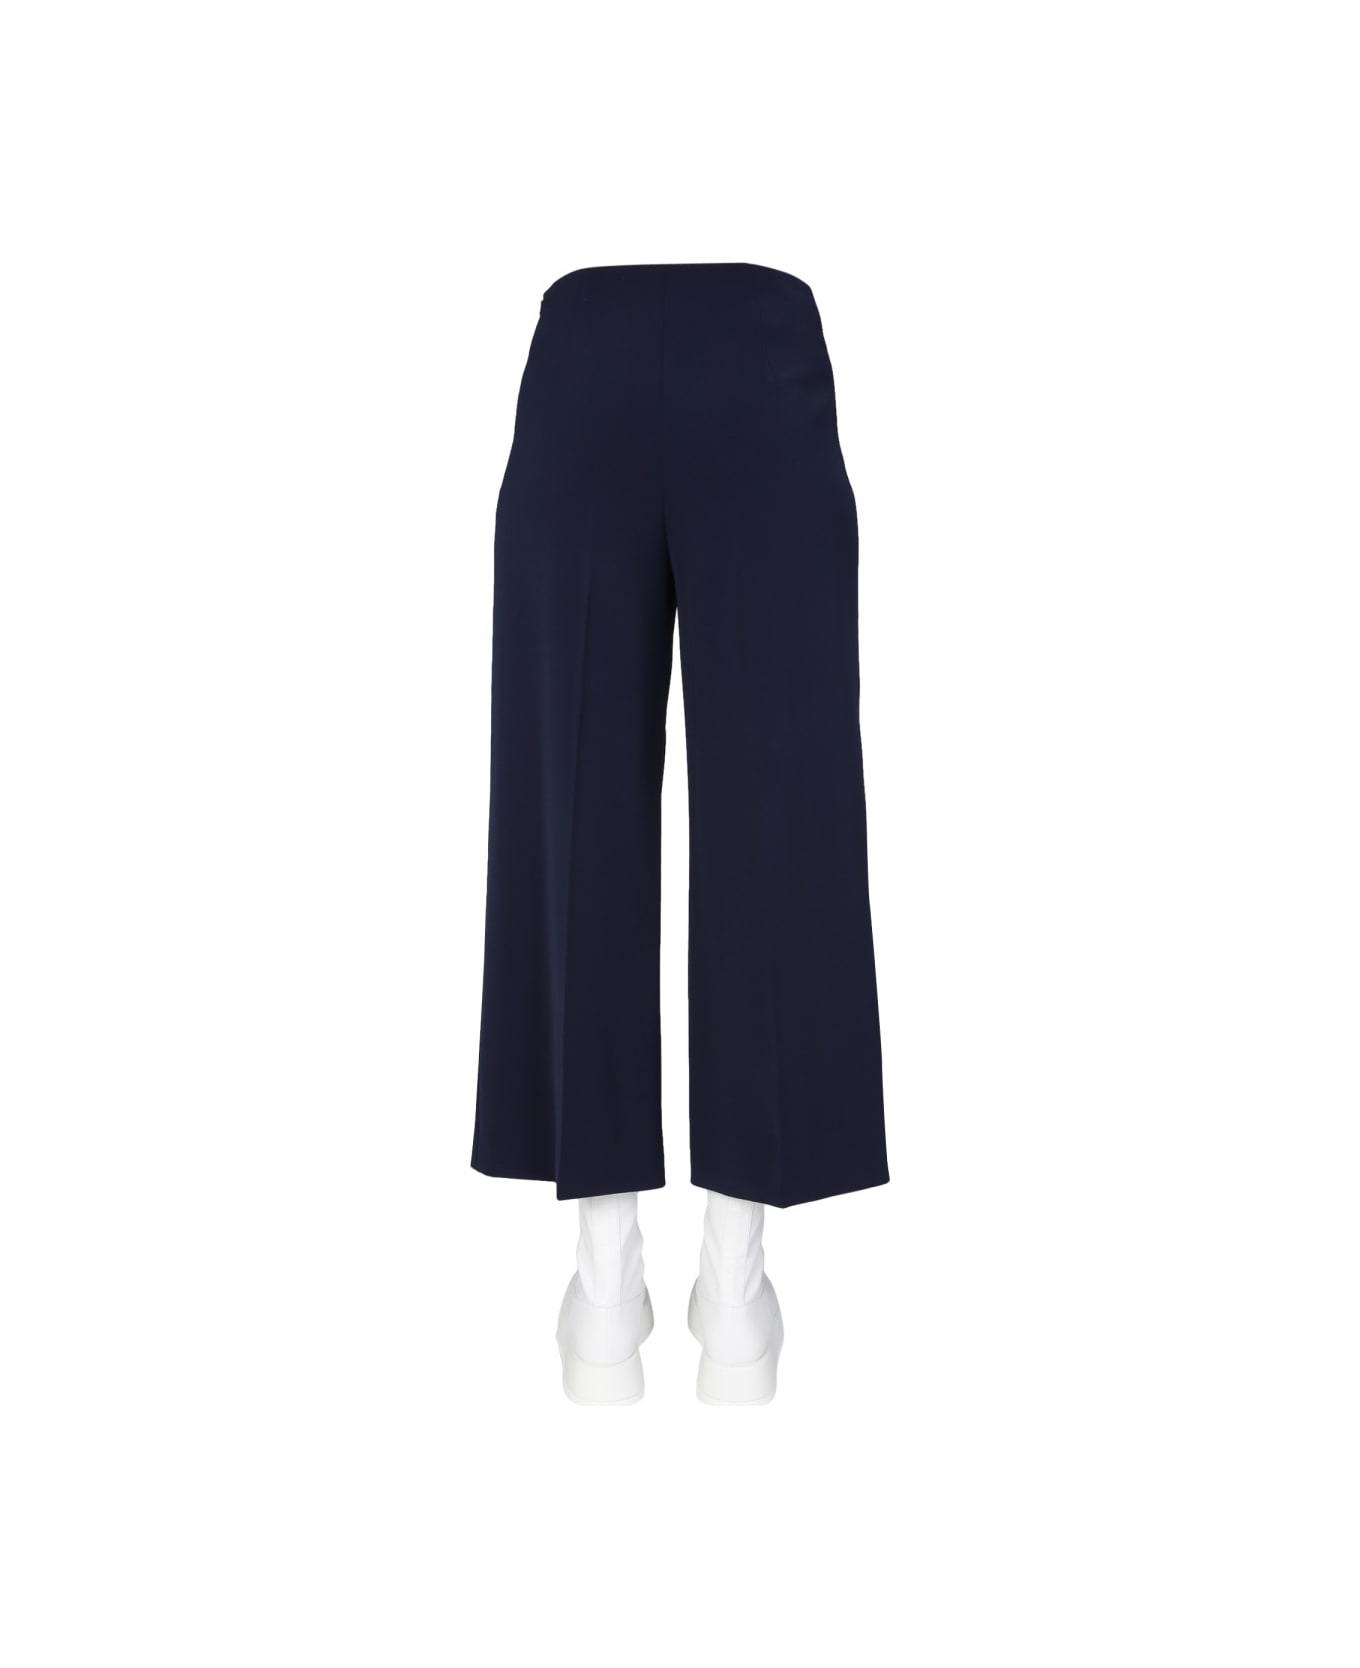 Boutique Moschino Wide Leg Trousers - BLUE ボトムス